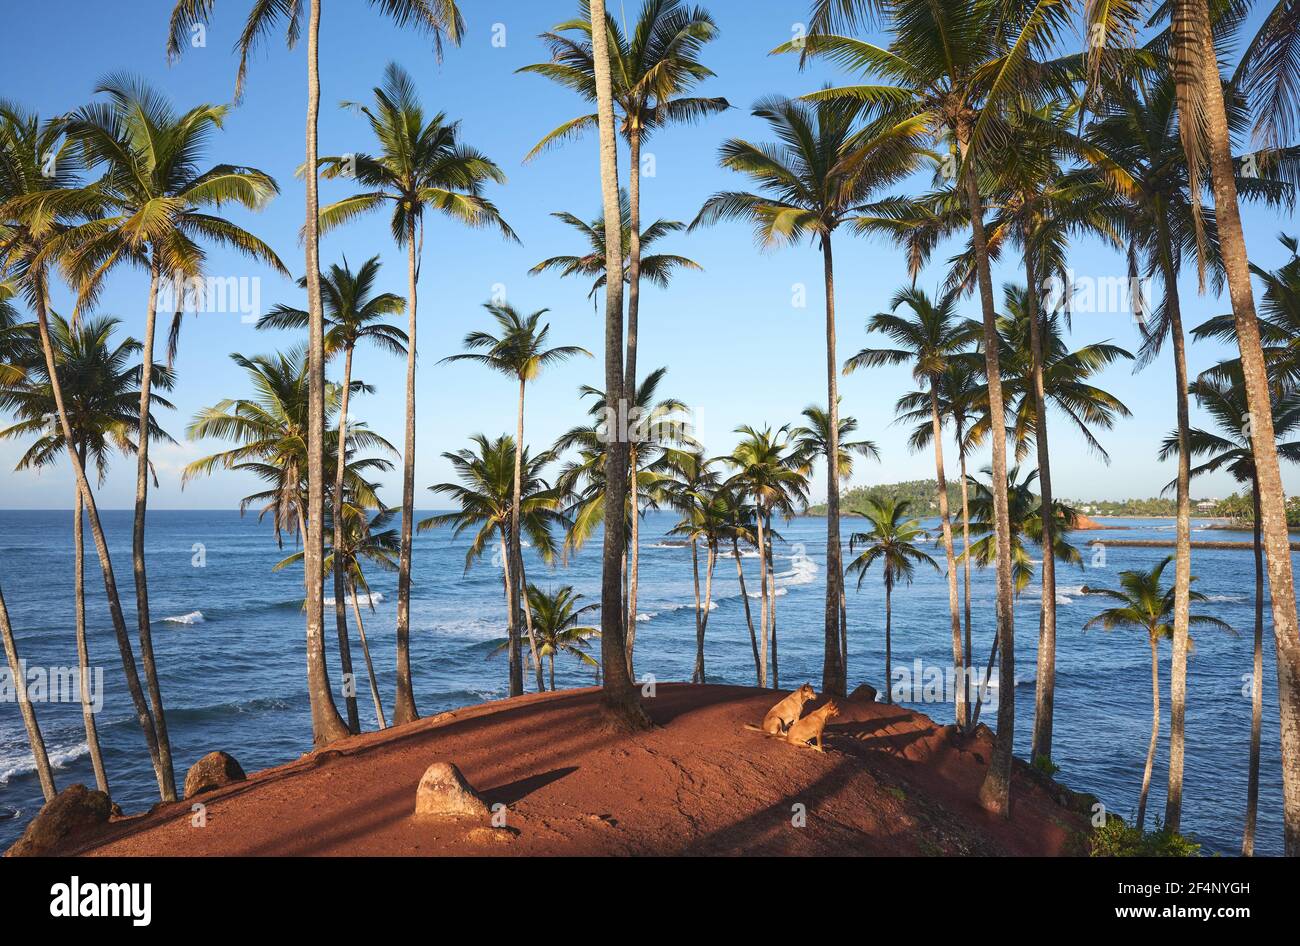 Coconut palm trees and two dogs on a tropical beach at sunrise, Sri Lanka. Stock Photo